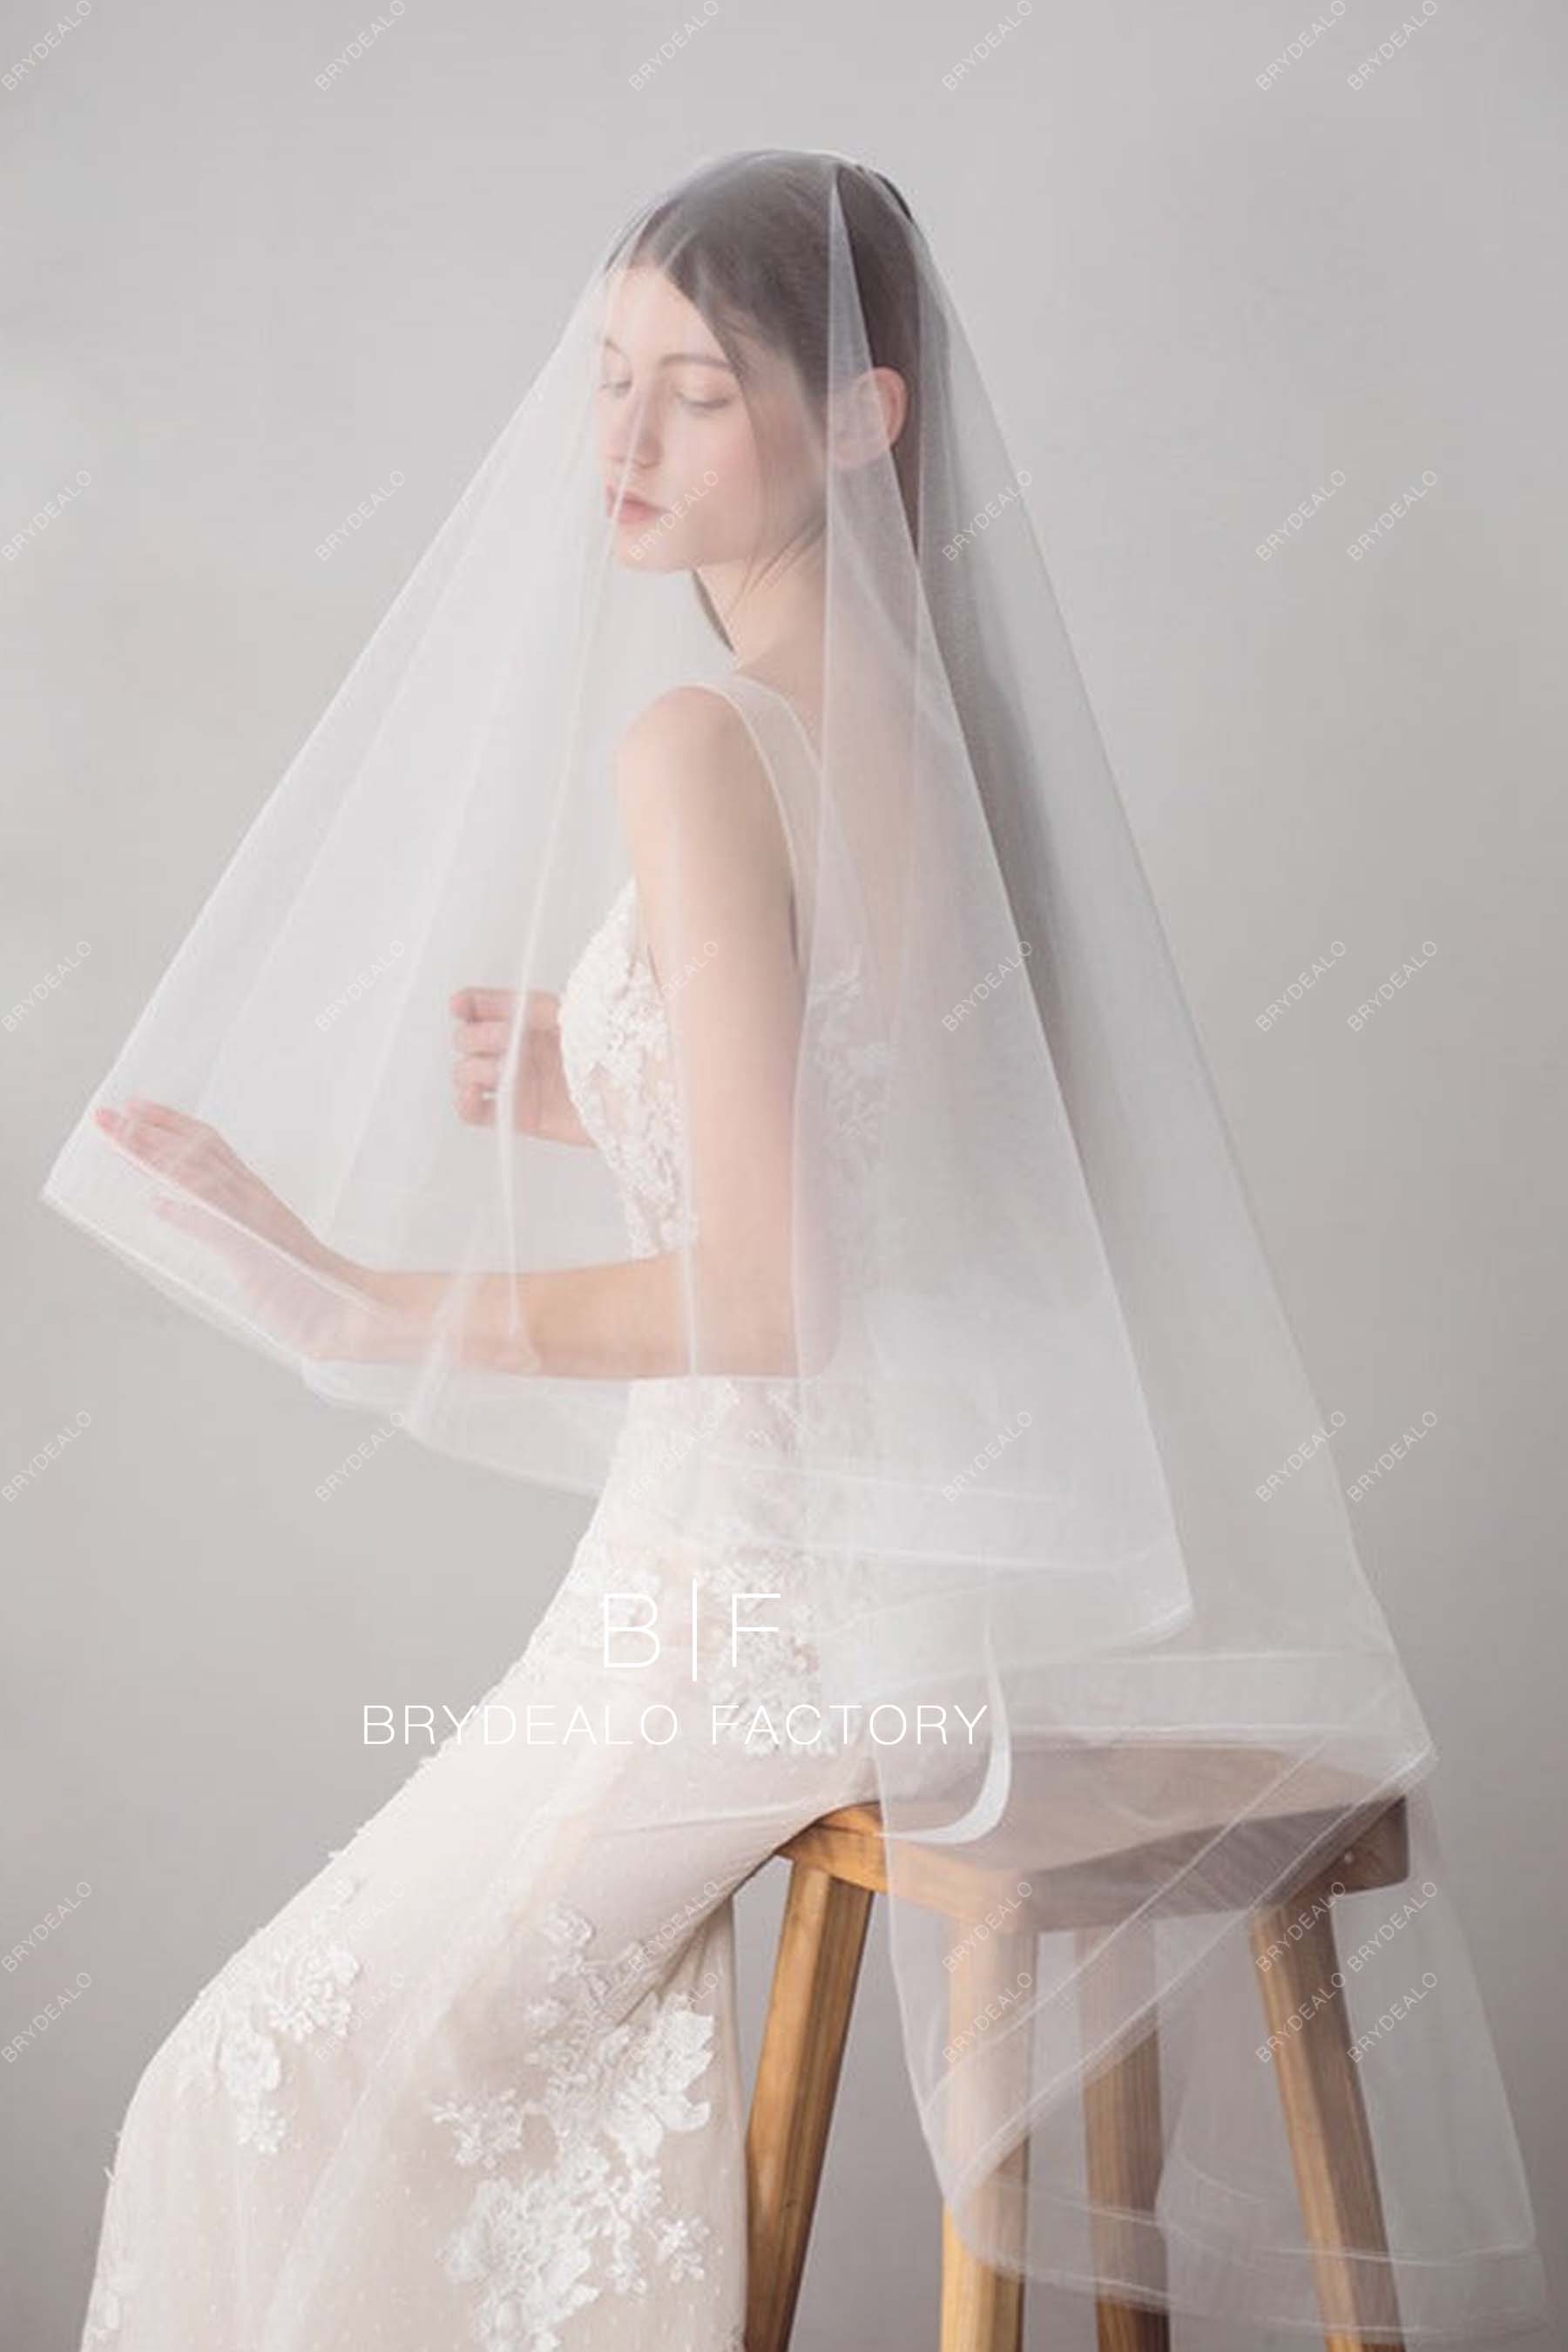 Waltz Length 2 Tone Wedding Veil With Horsehair Edge, Face Blusher Price,  Ballet Bridal Accessory T 53 From Mengshangfang, $52.62